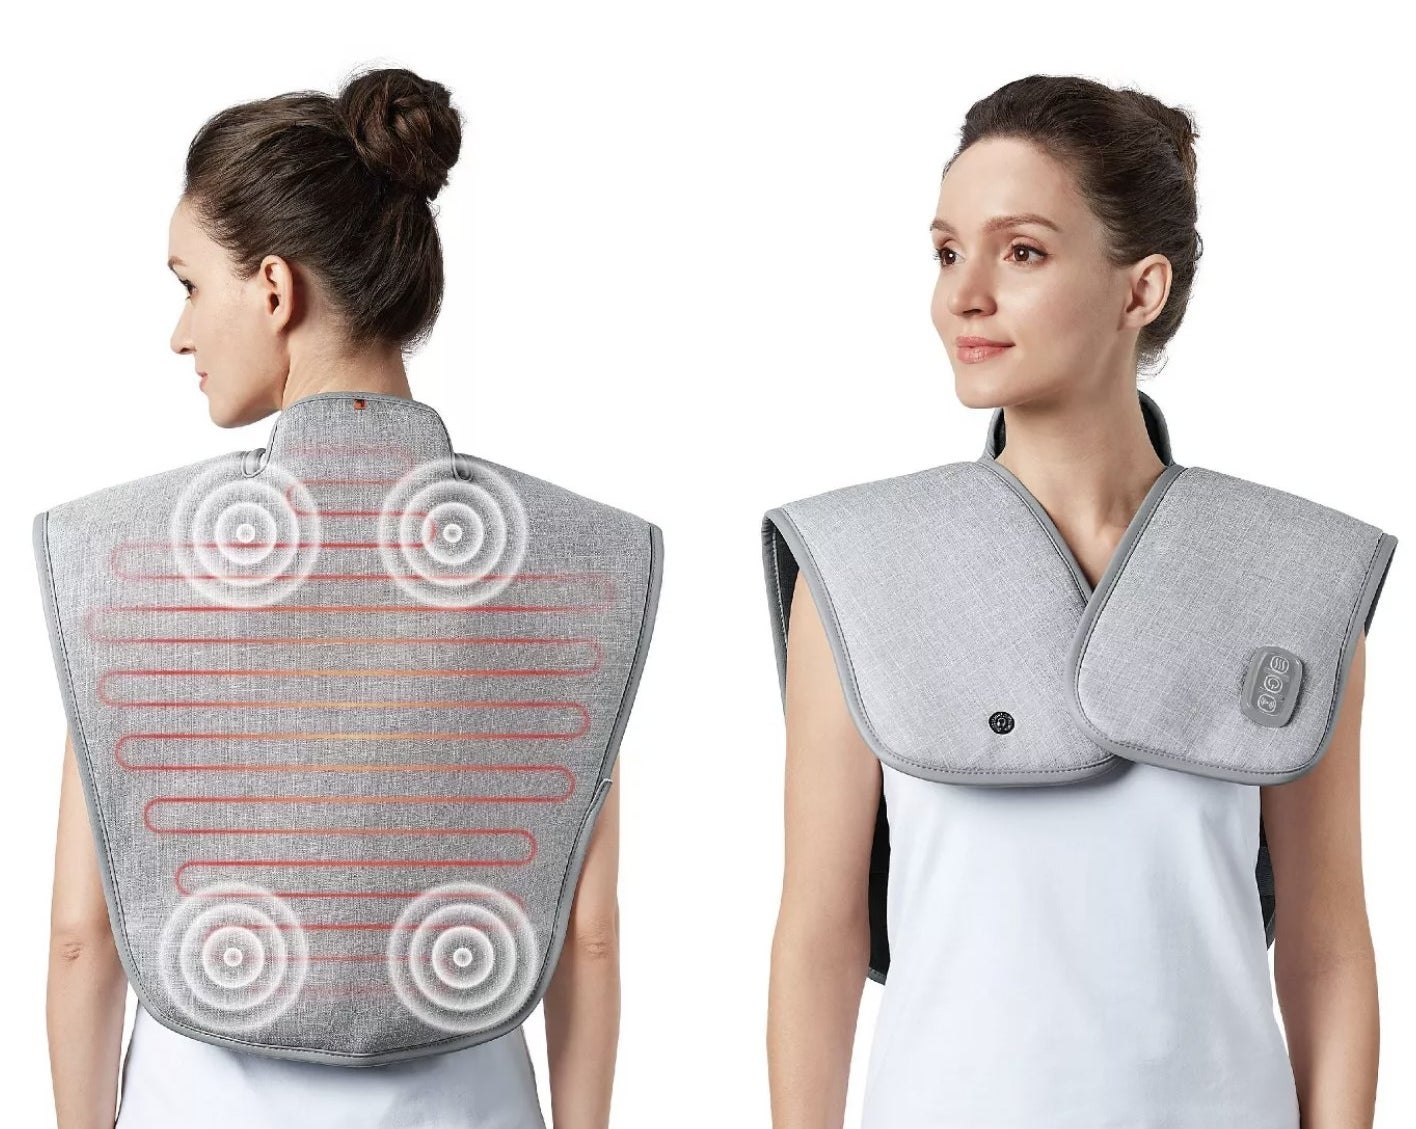 Model wearing the pad over her upper back and shoulders with designs showing the heating and massage elements inside the wrap